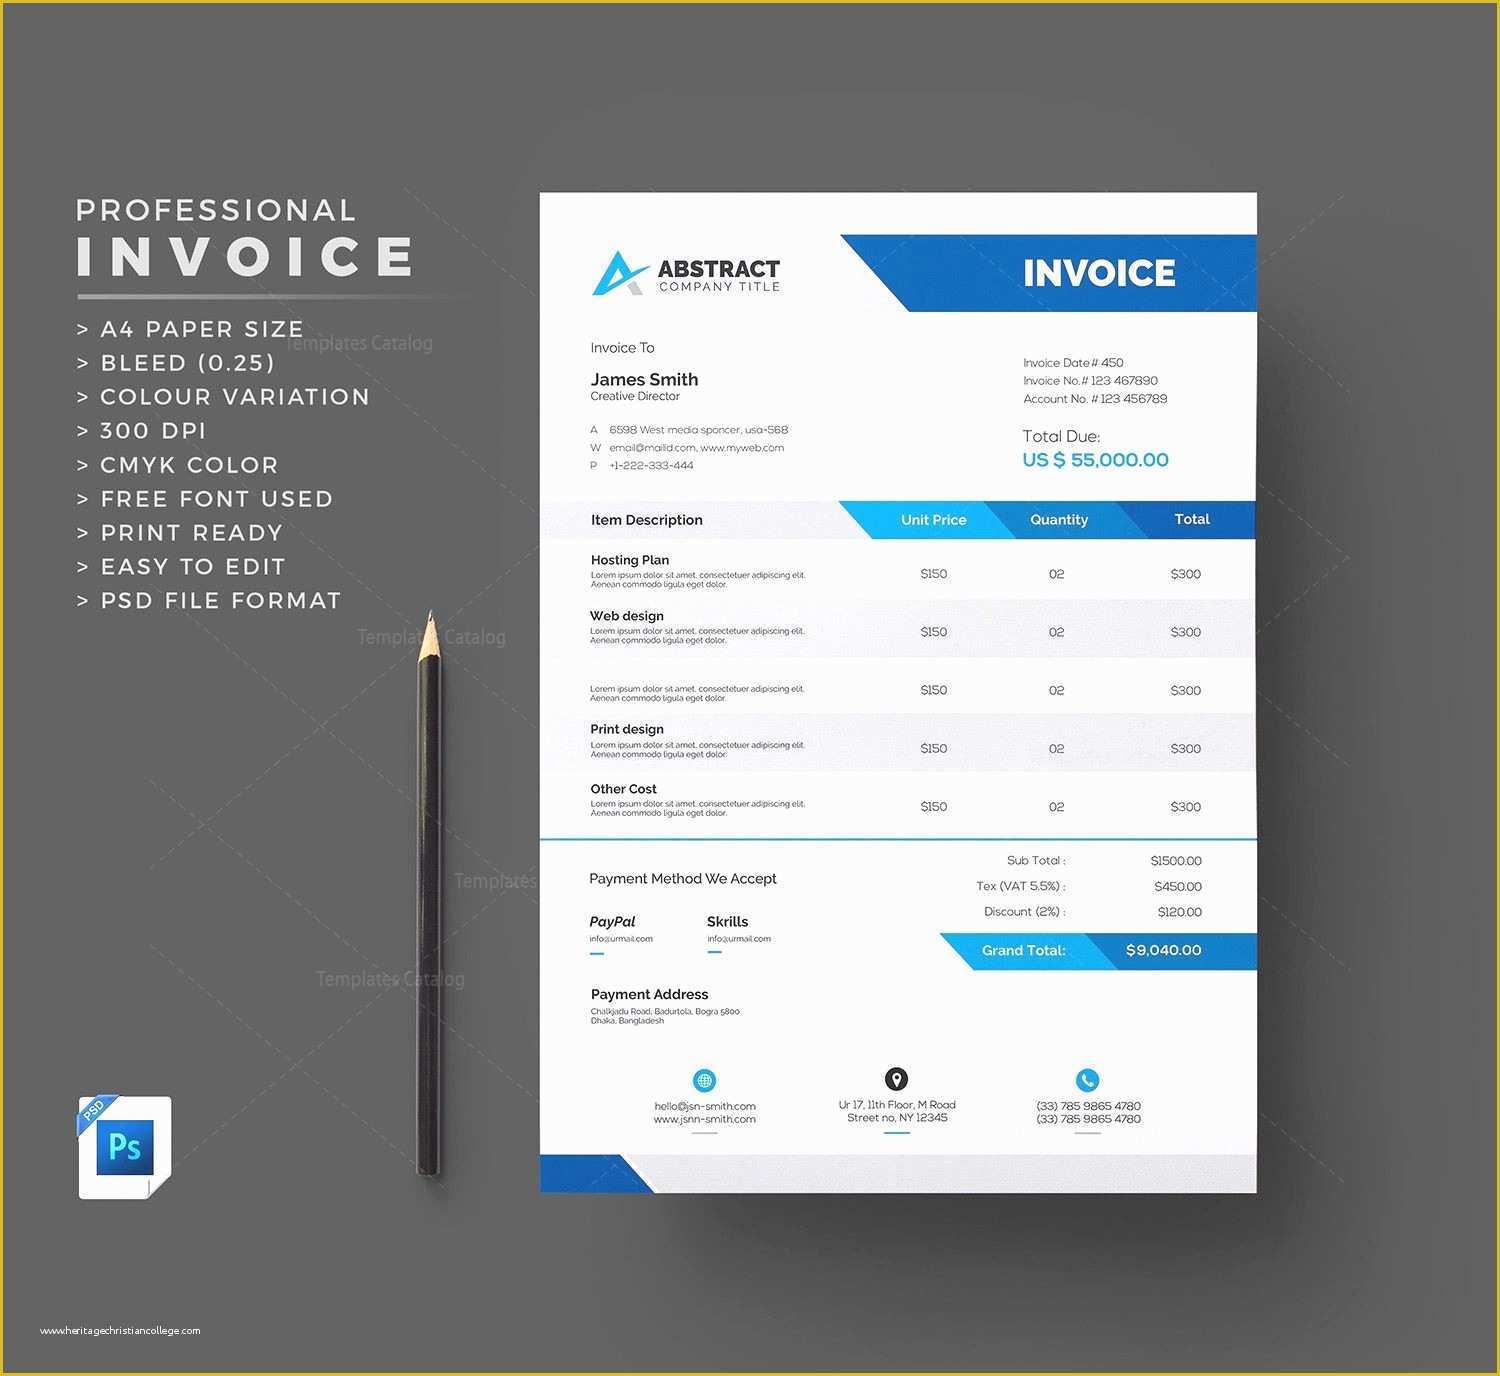 Adobe Photoshop Psd Templates Free Download Of Fillable Invoice Shop Template Resume Templates Psd